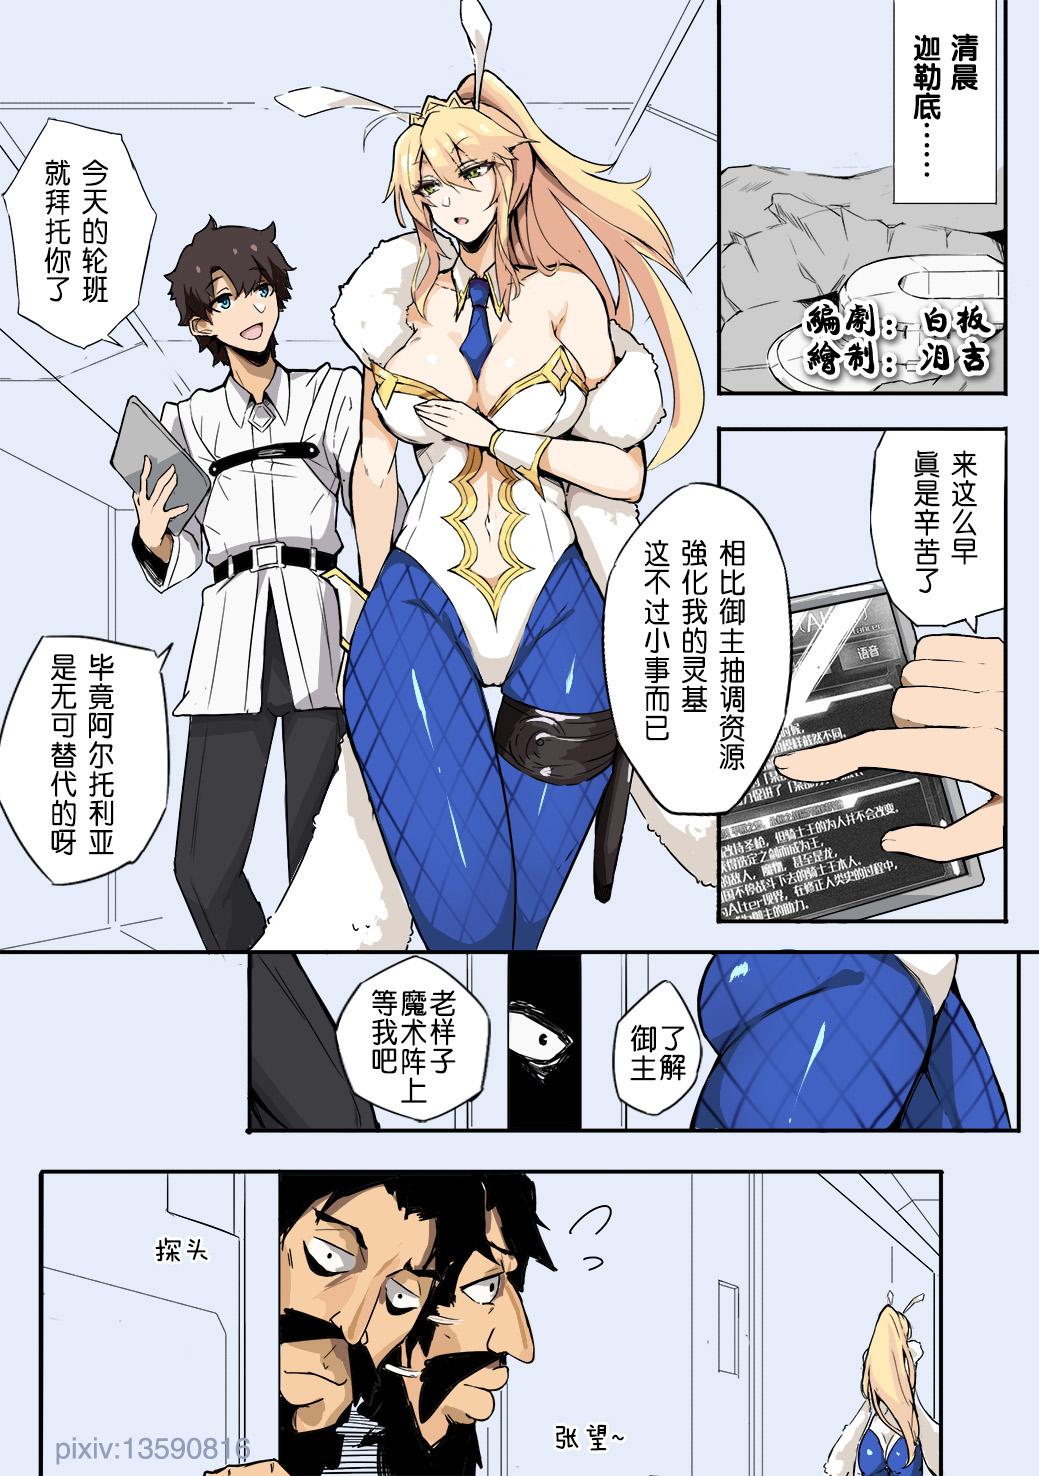 Ass Licking fate 黑胡子的阴谋 - Fate grand order Teen Sex - Page 1